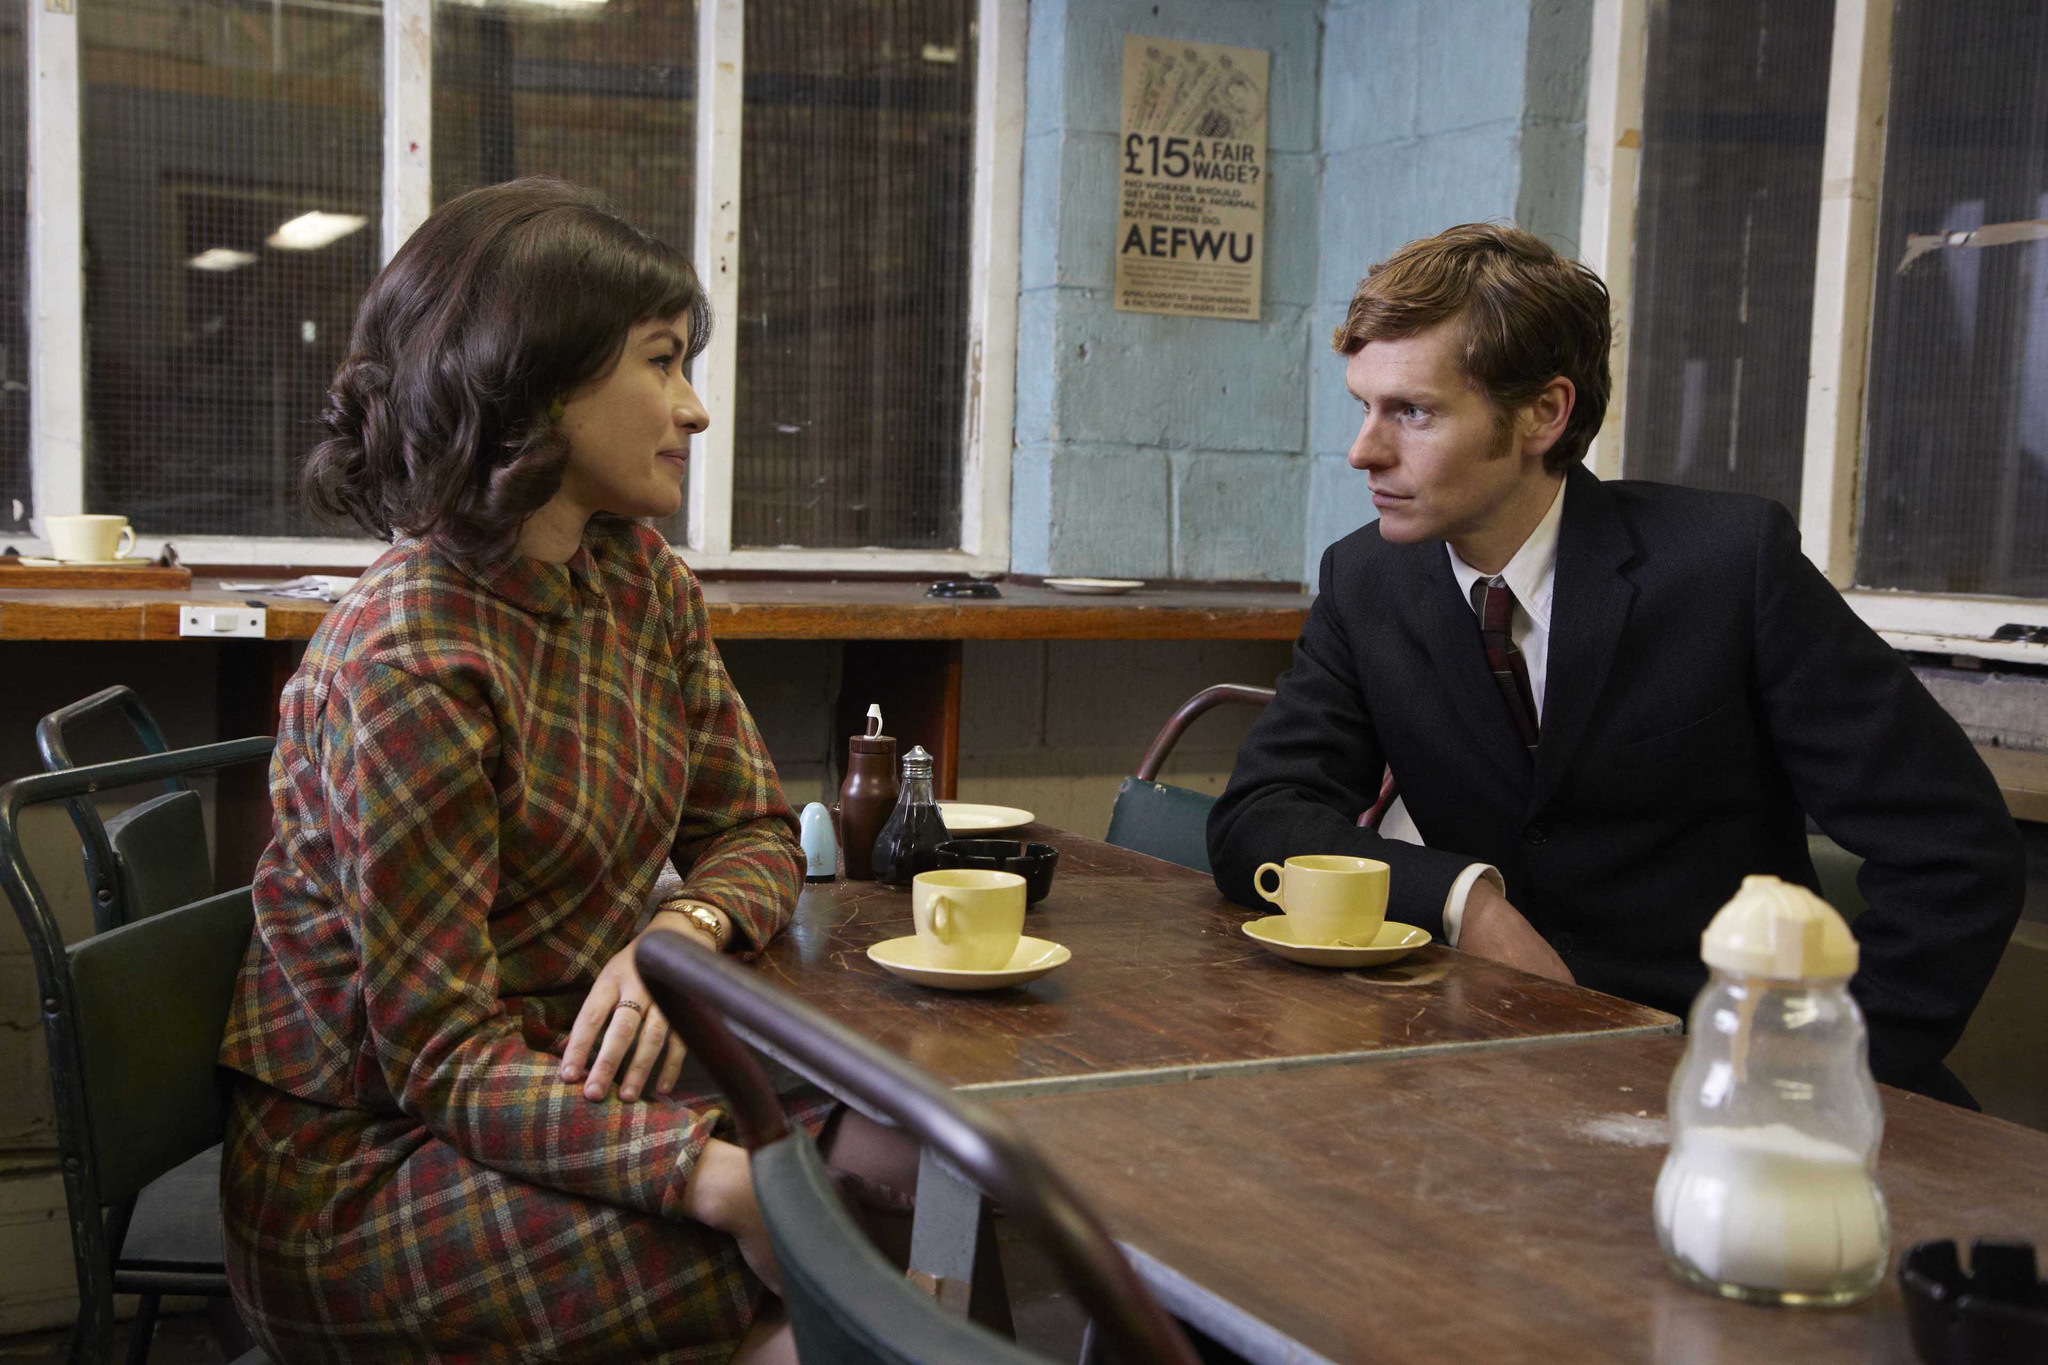 Still of Shaun Evans and Maimie McCoy in Endeavour (2013)